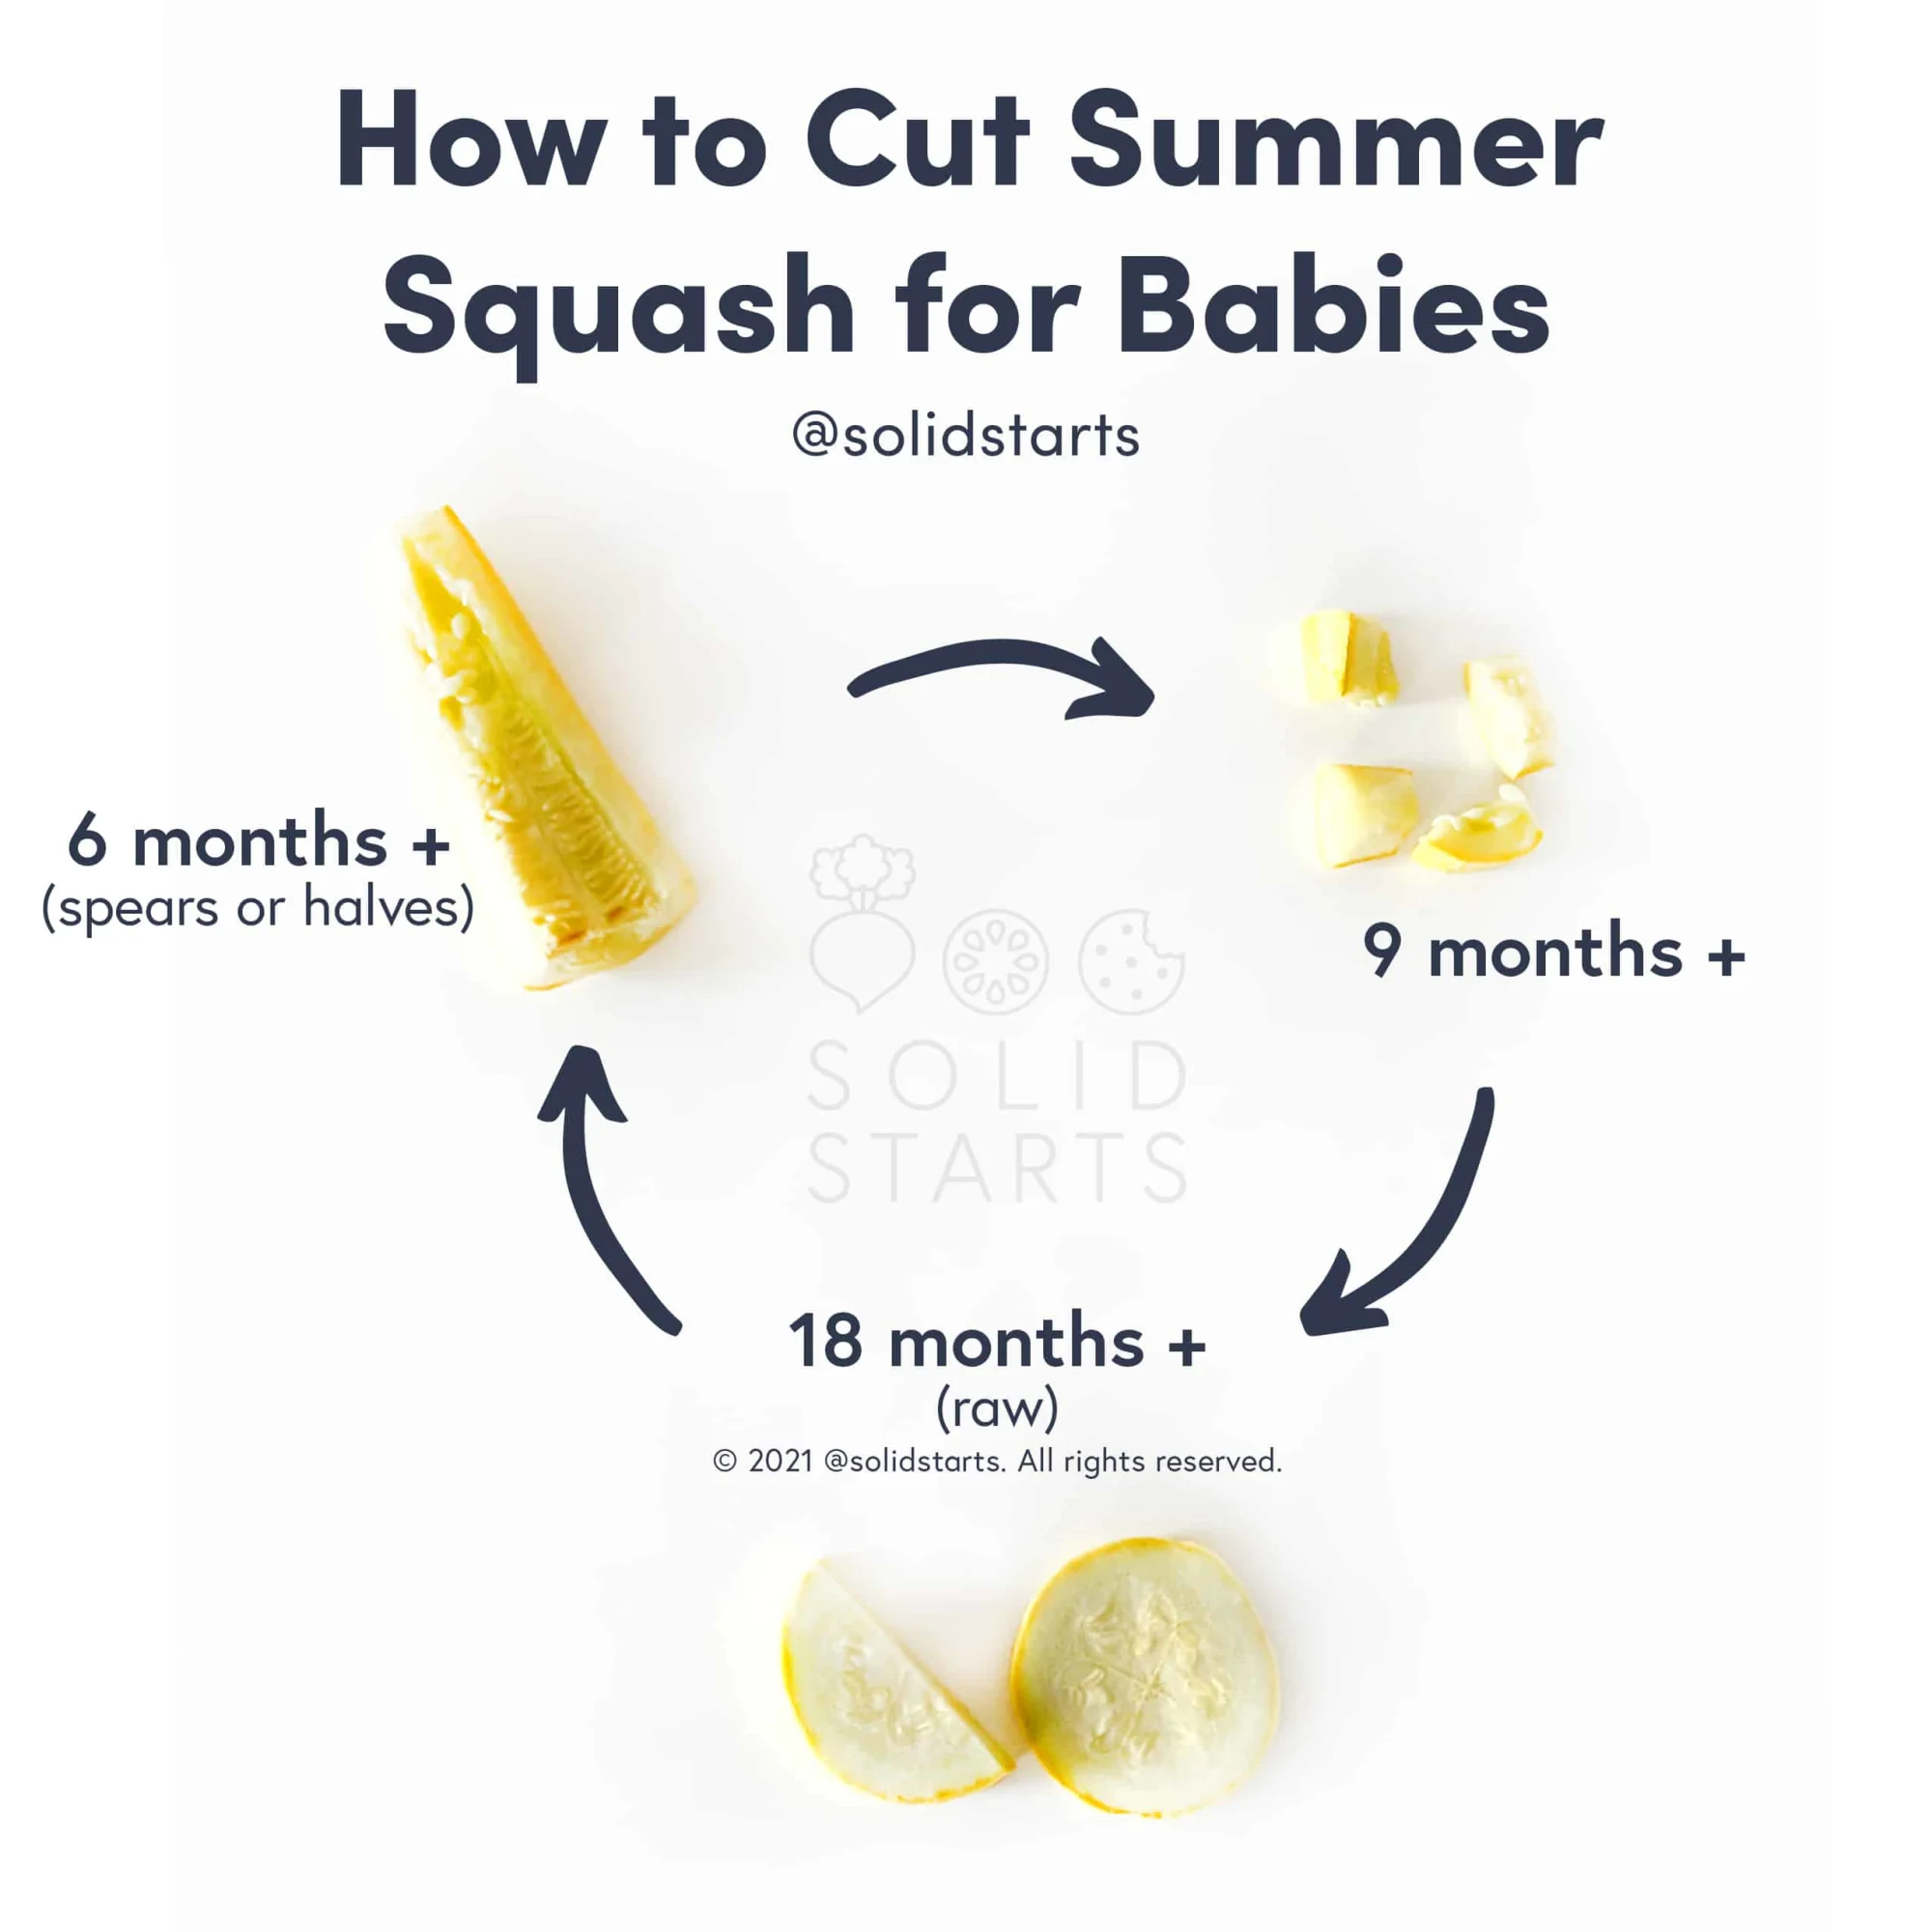 an infographic with the header "how to cut summer squash for babies": a cooked summer squash spear for 6 months+, bite-sized pieces of cooked squash for 9 months +, and raw rounds and half-moons for toddlers 18 months +